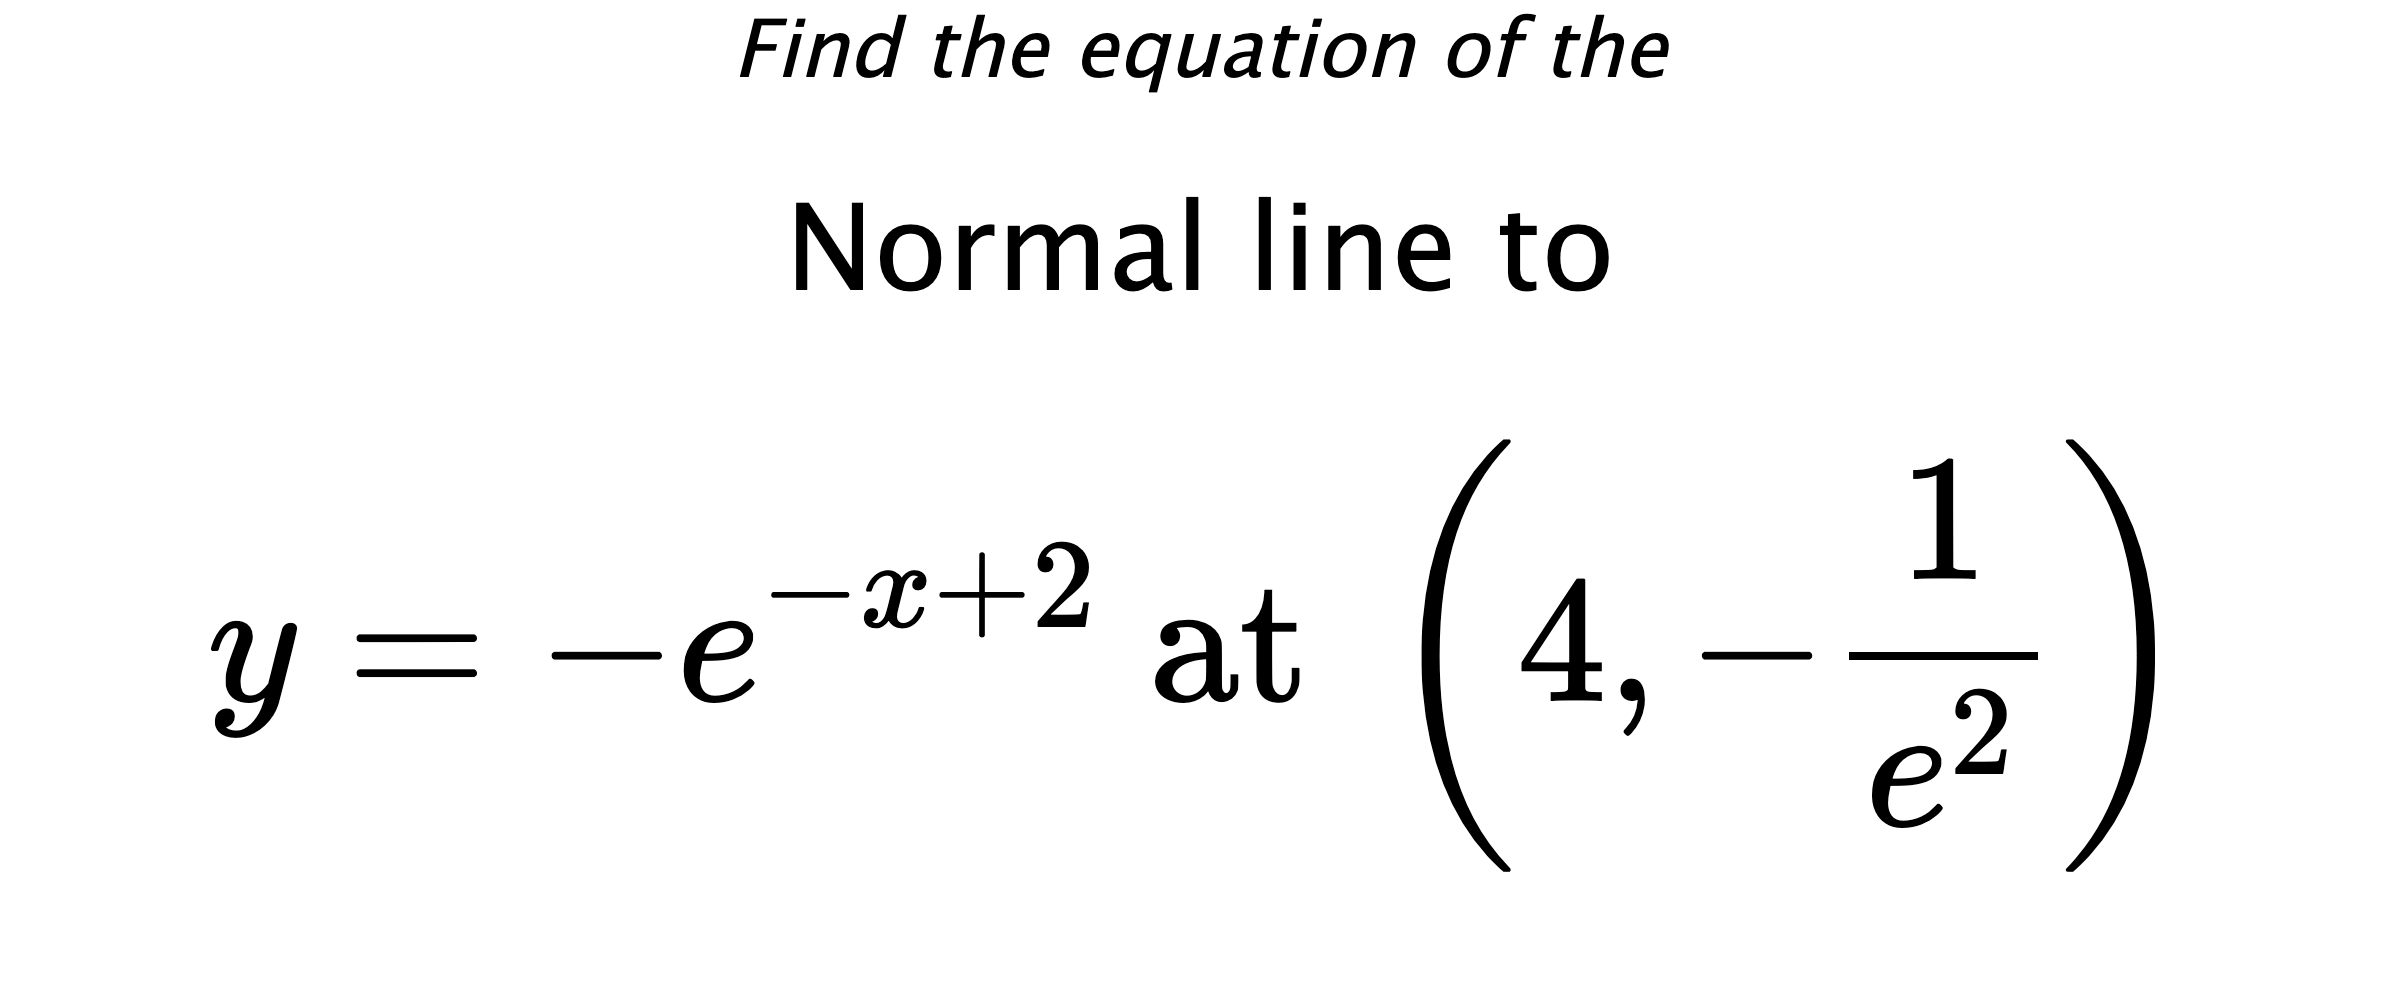 Find the equation of the Normal line to $$ y=-e^{-x+2} \text{ at } \left(4,-\frac{1}{e^2}\right) $$